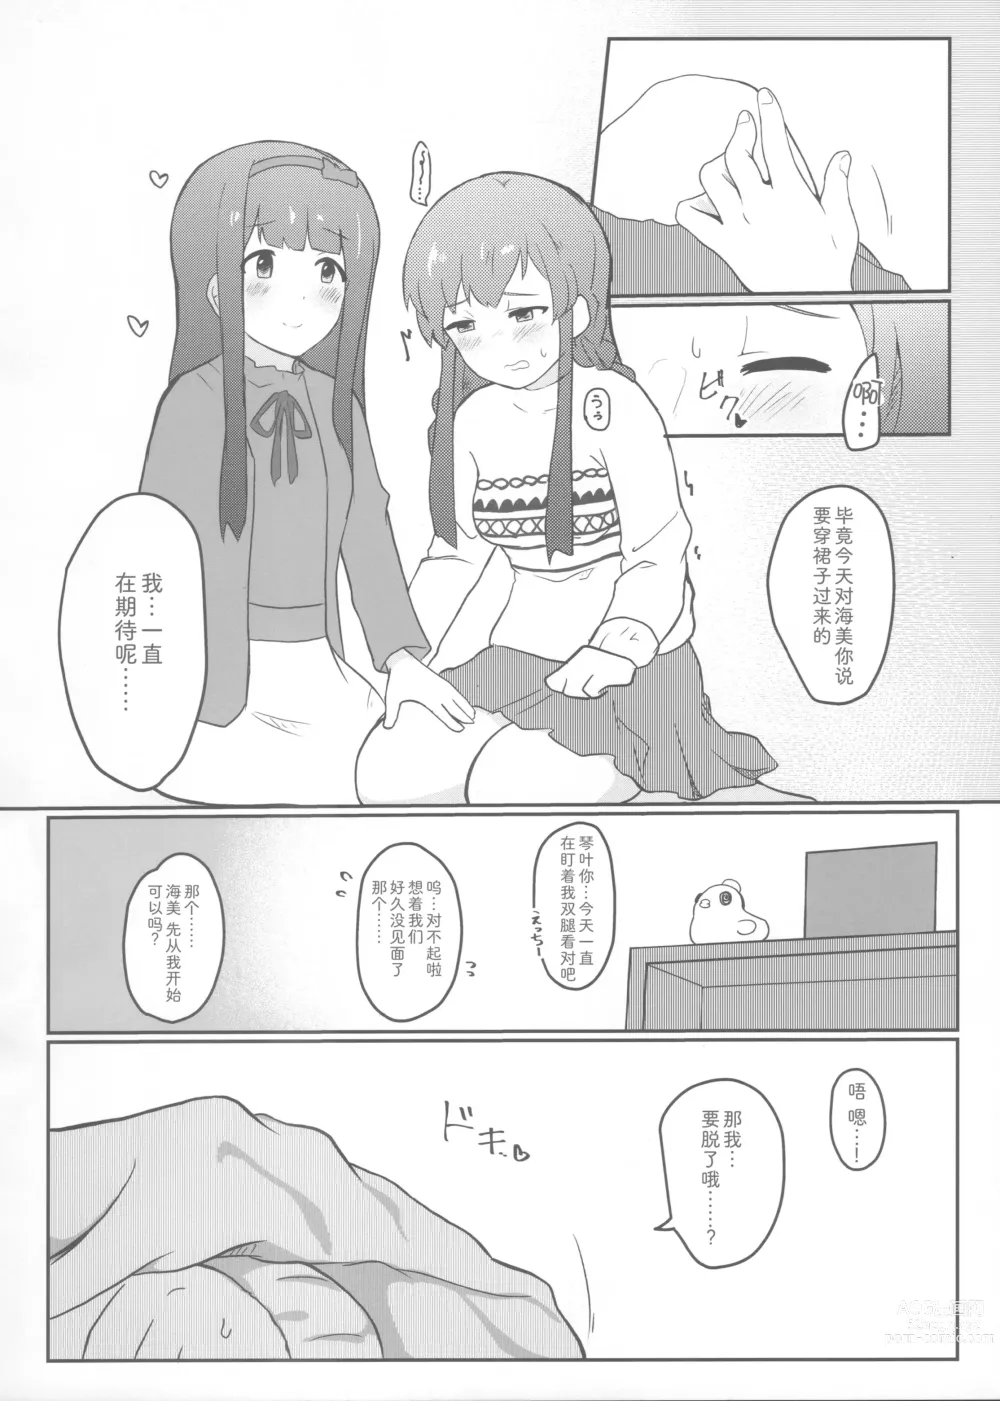 Page 5 of doujinshi Understand...